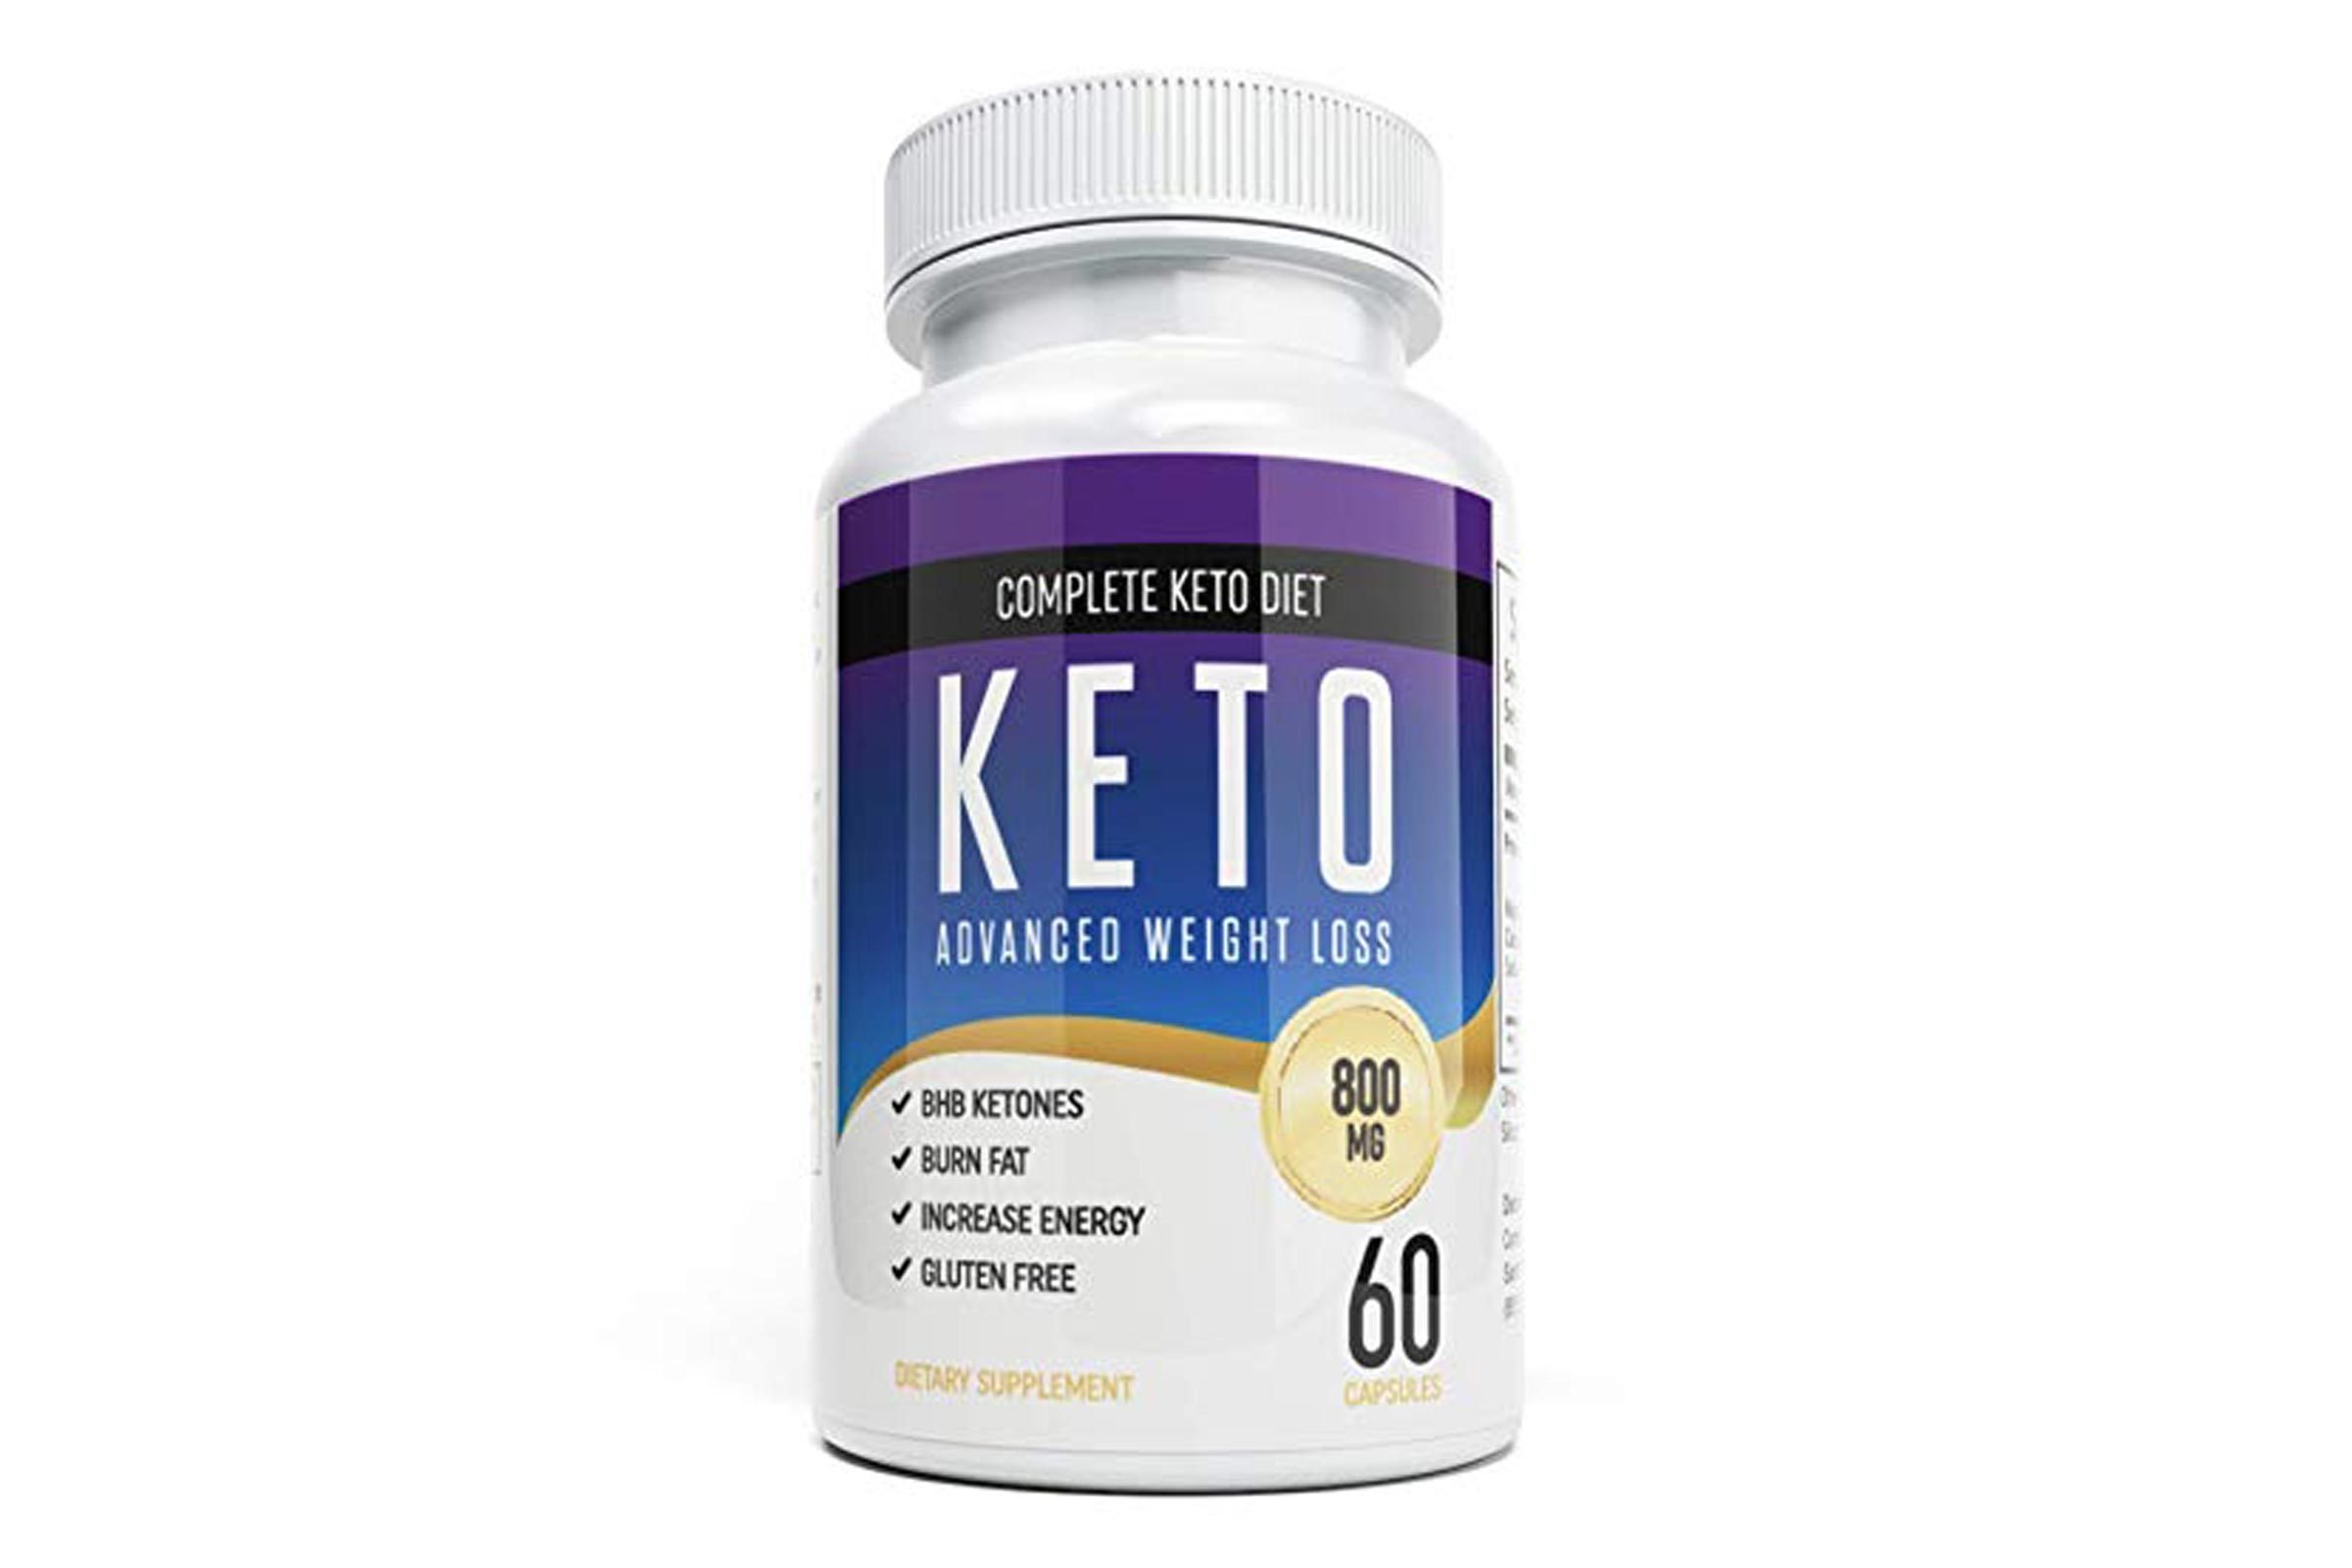 Keto Pills - Weight Loss Supplements to Burn Fat Fast - Boost Energy and Metabolism - Best Ketosis Supplement for Women and Men - Best Keto Diet - 60 Capsules 